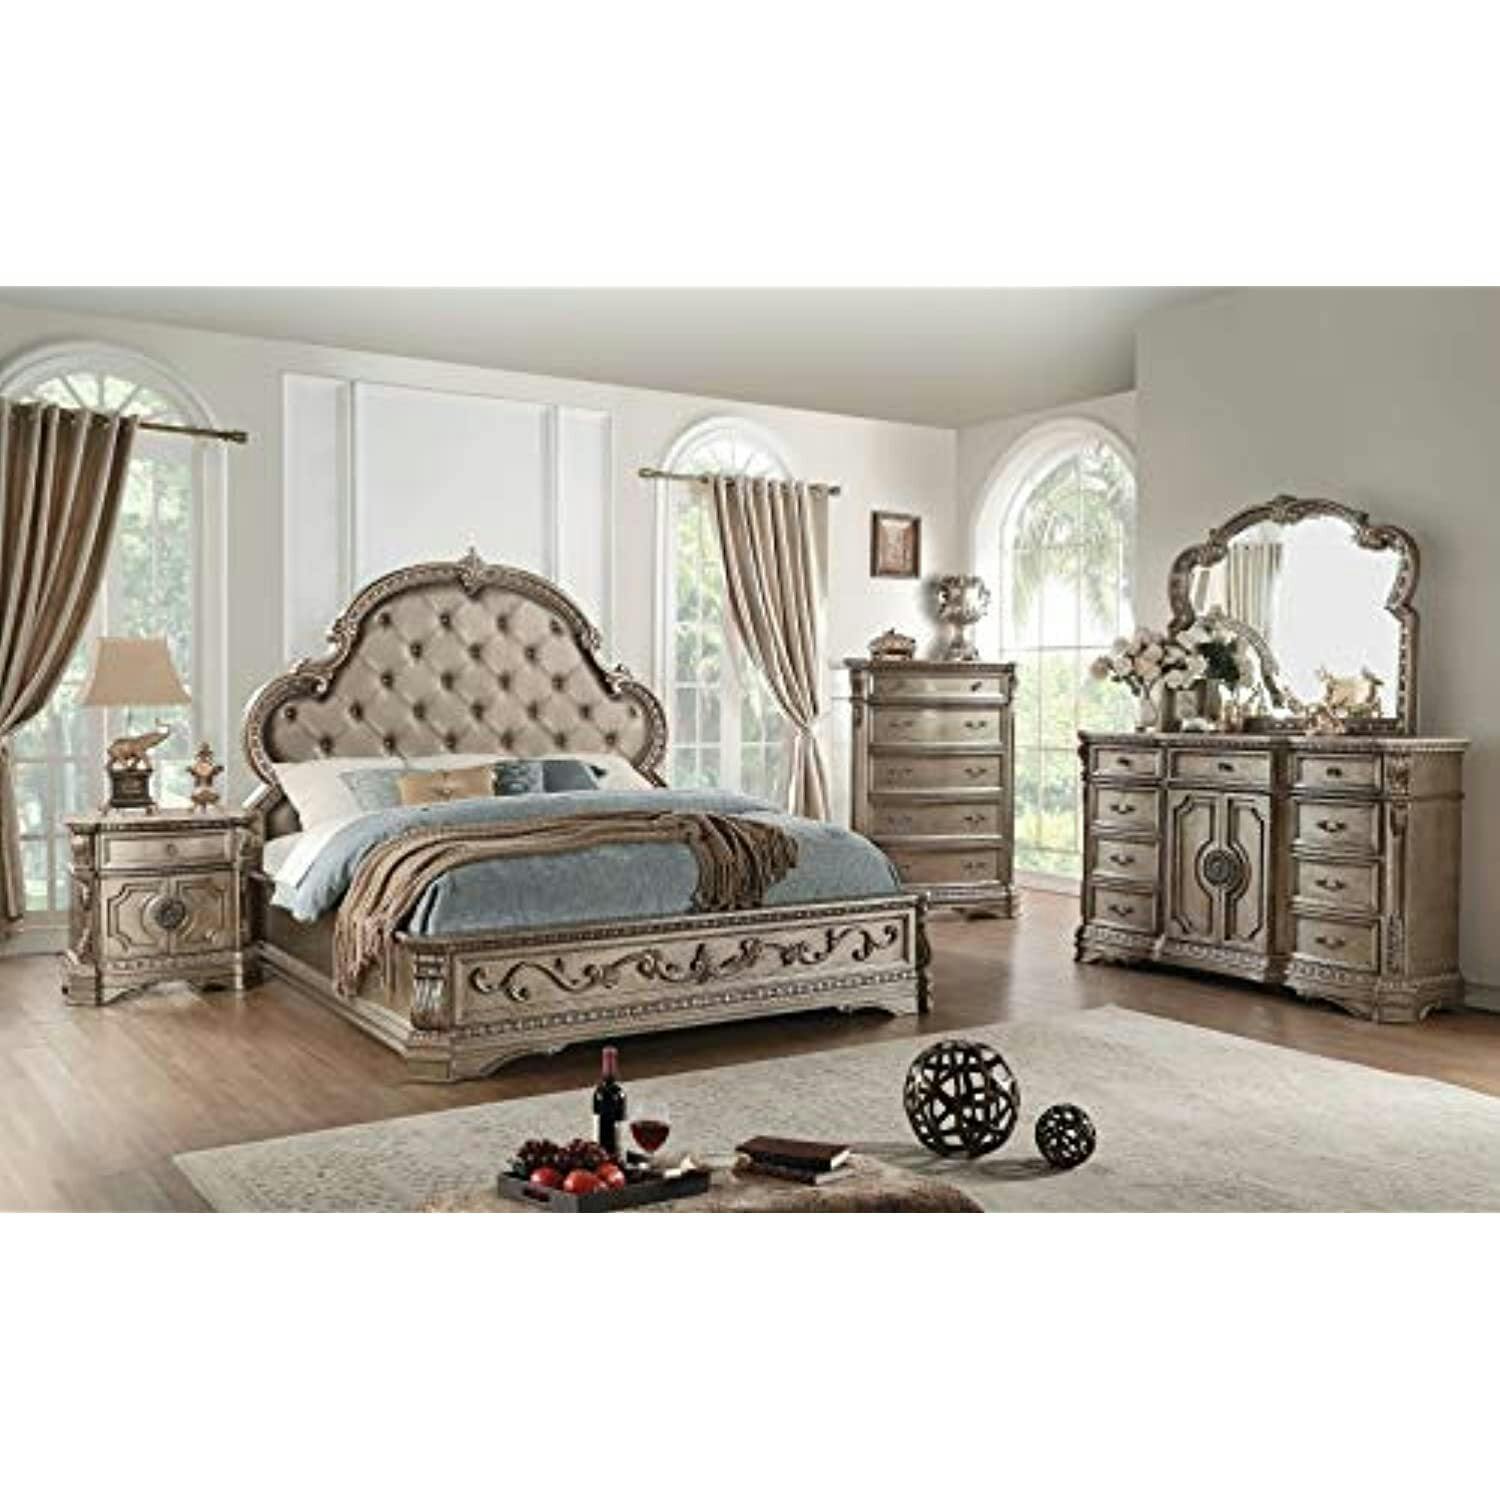 King-Sized Mahogany Wood Frame Upholstered Bed with Tufted Nailhead Trim